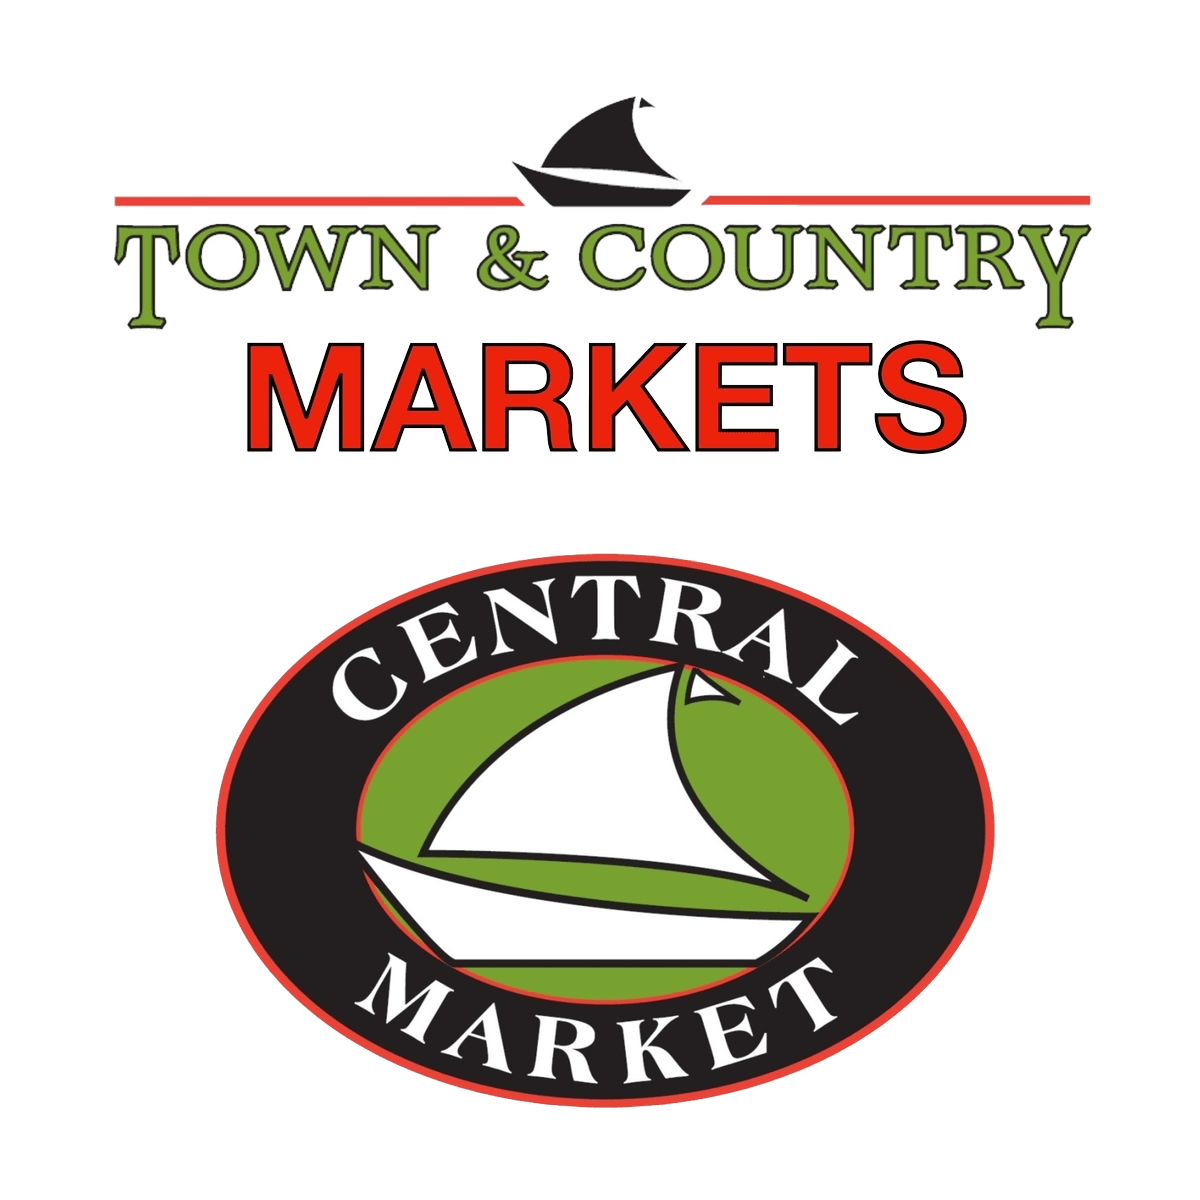 Town & Country and Central Market